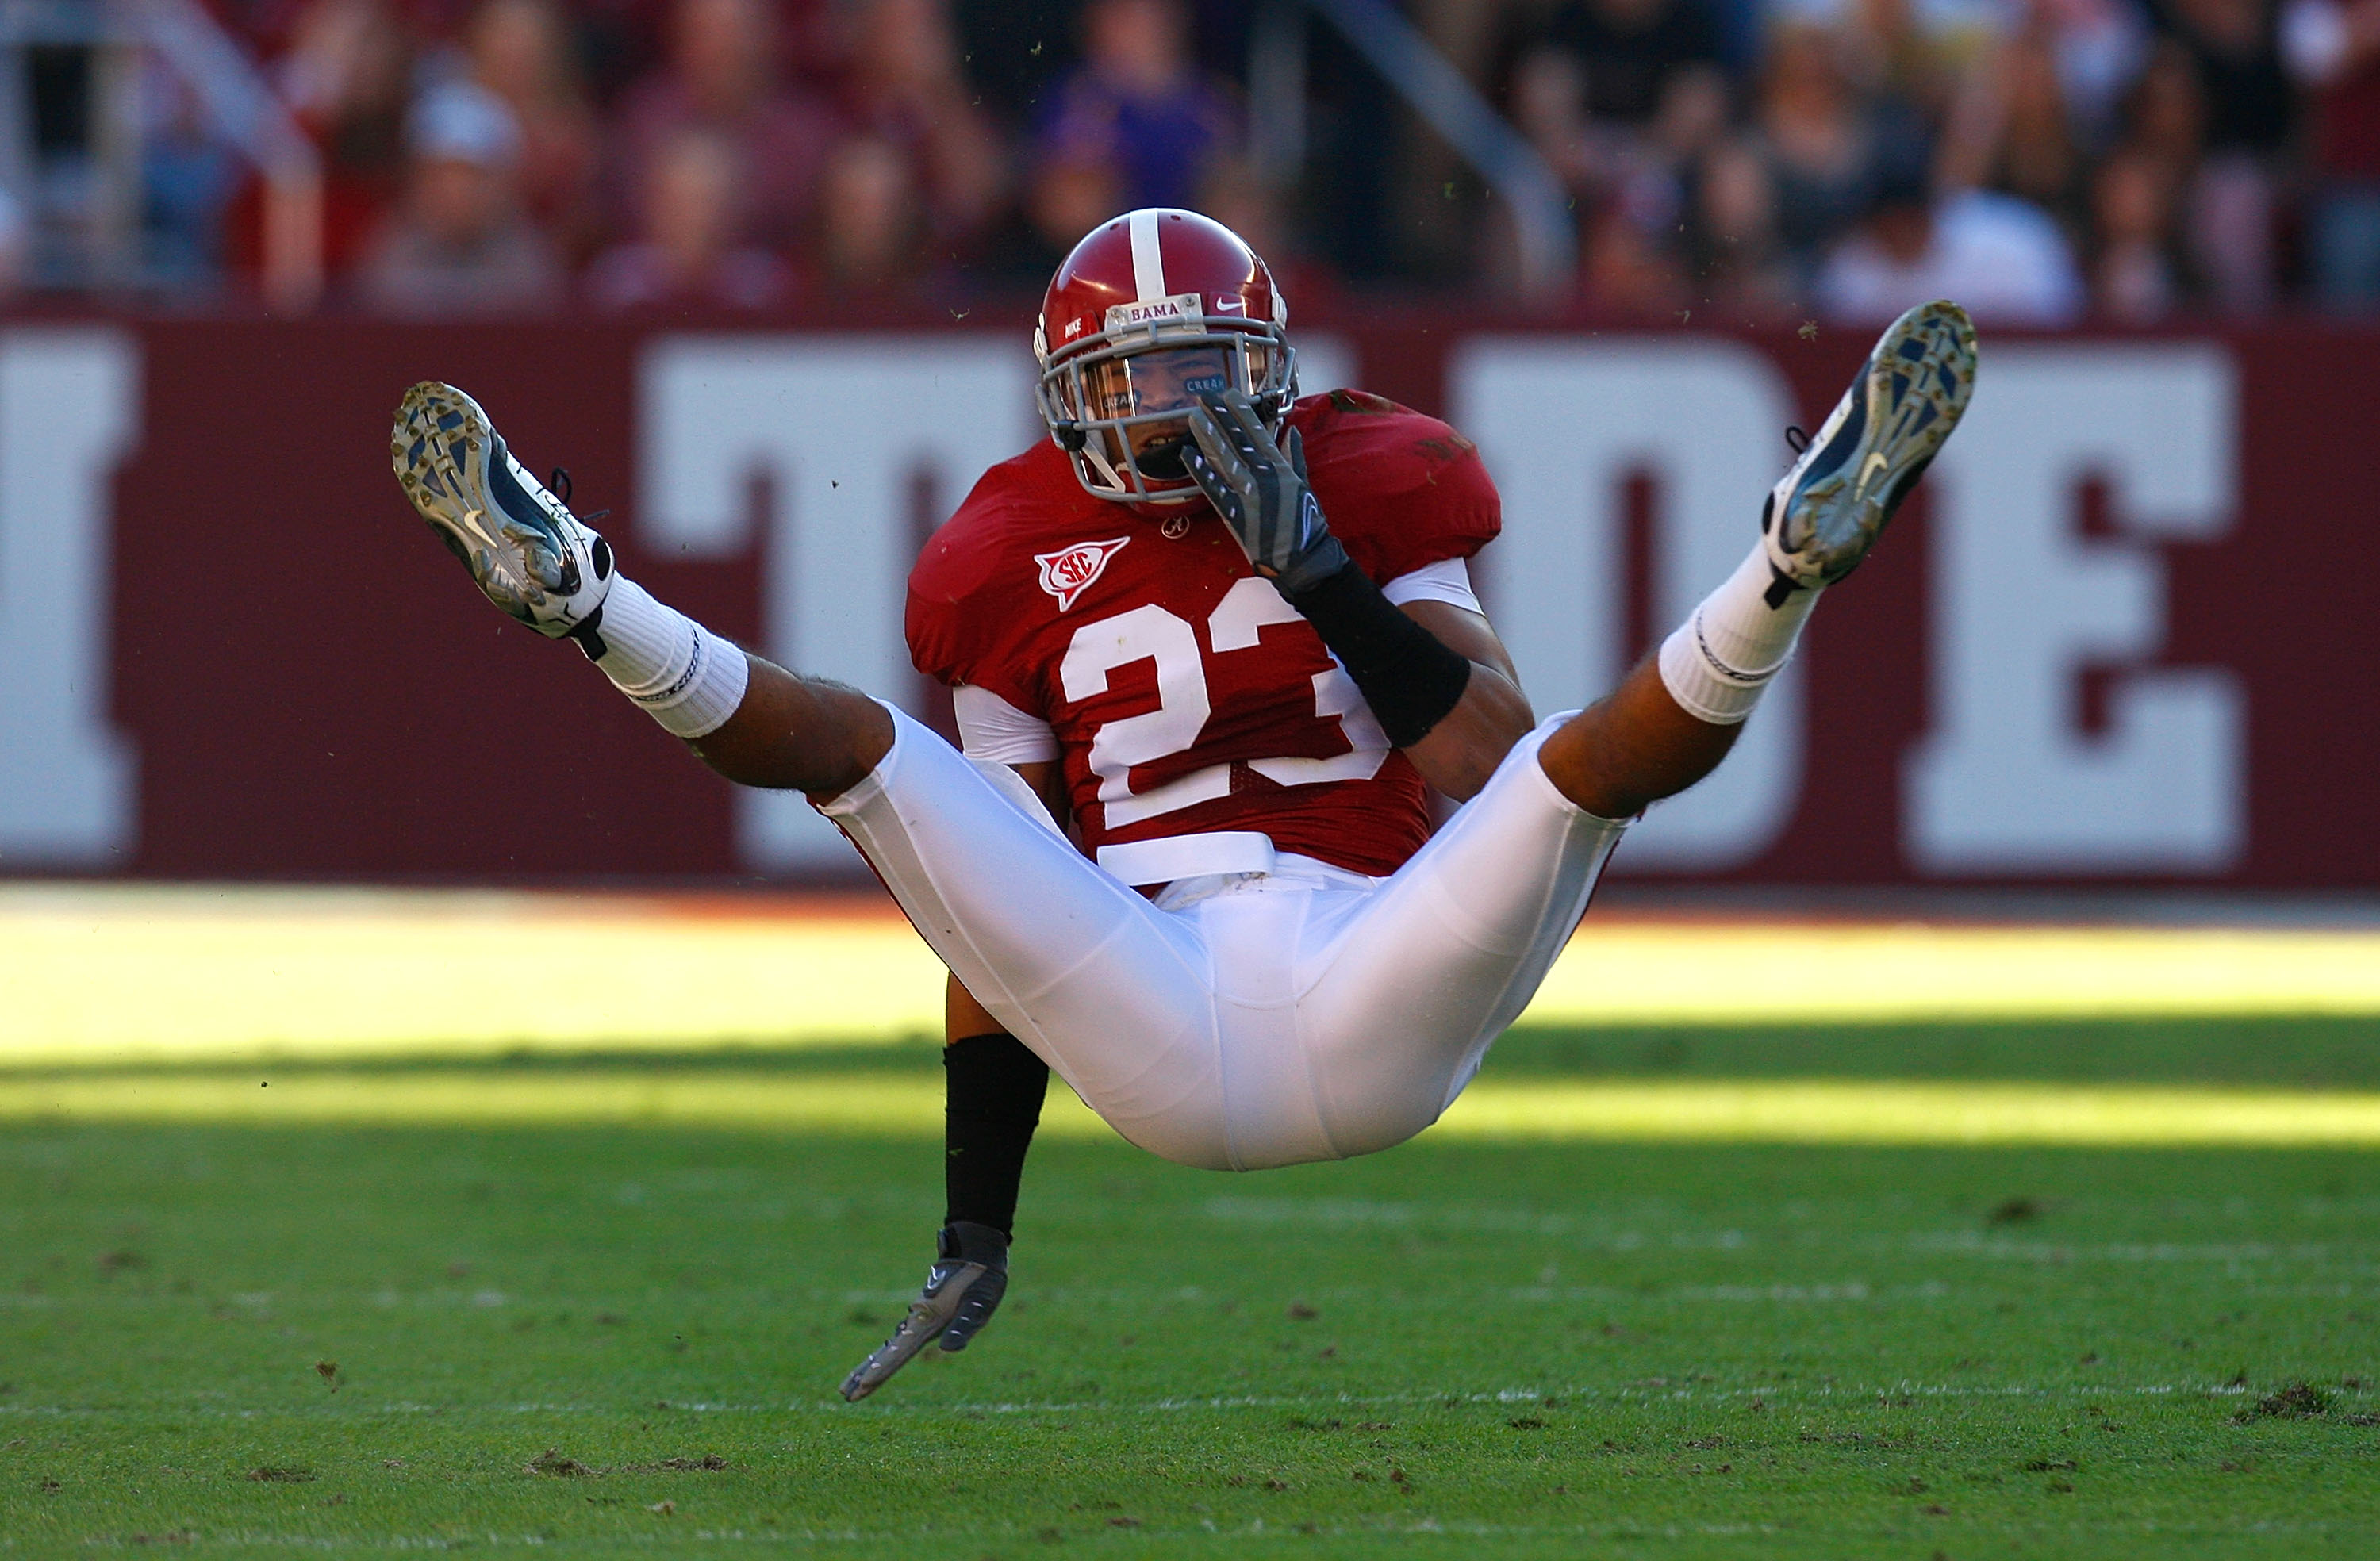 TUSCALOOSA, AL - NOVEMBER 07:  Robby Green #23 of the Alabama Crimson Tide falls to the ground after a near interception against the Louisiana State University Tigers at Bryant-Denny Stadium on November 7, 2009 in Tuscaloosa, Alabama.  (Photo by Kevin C.